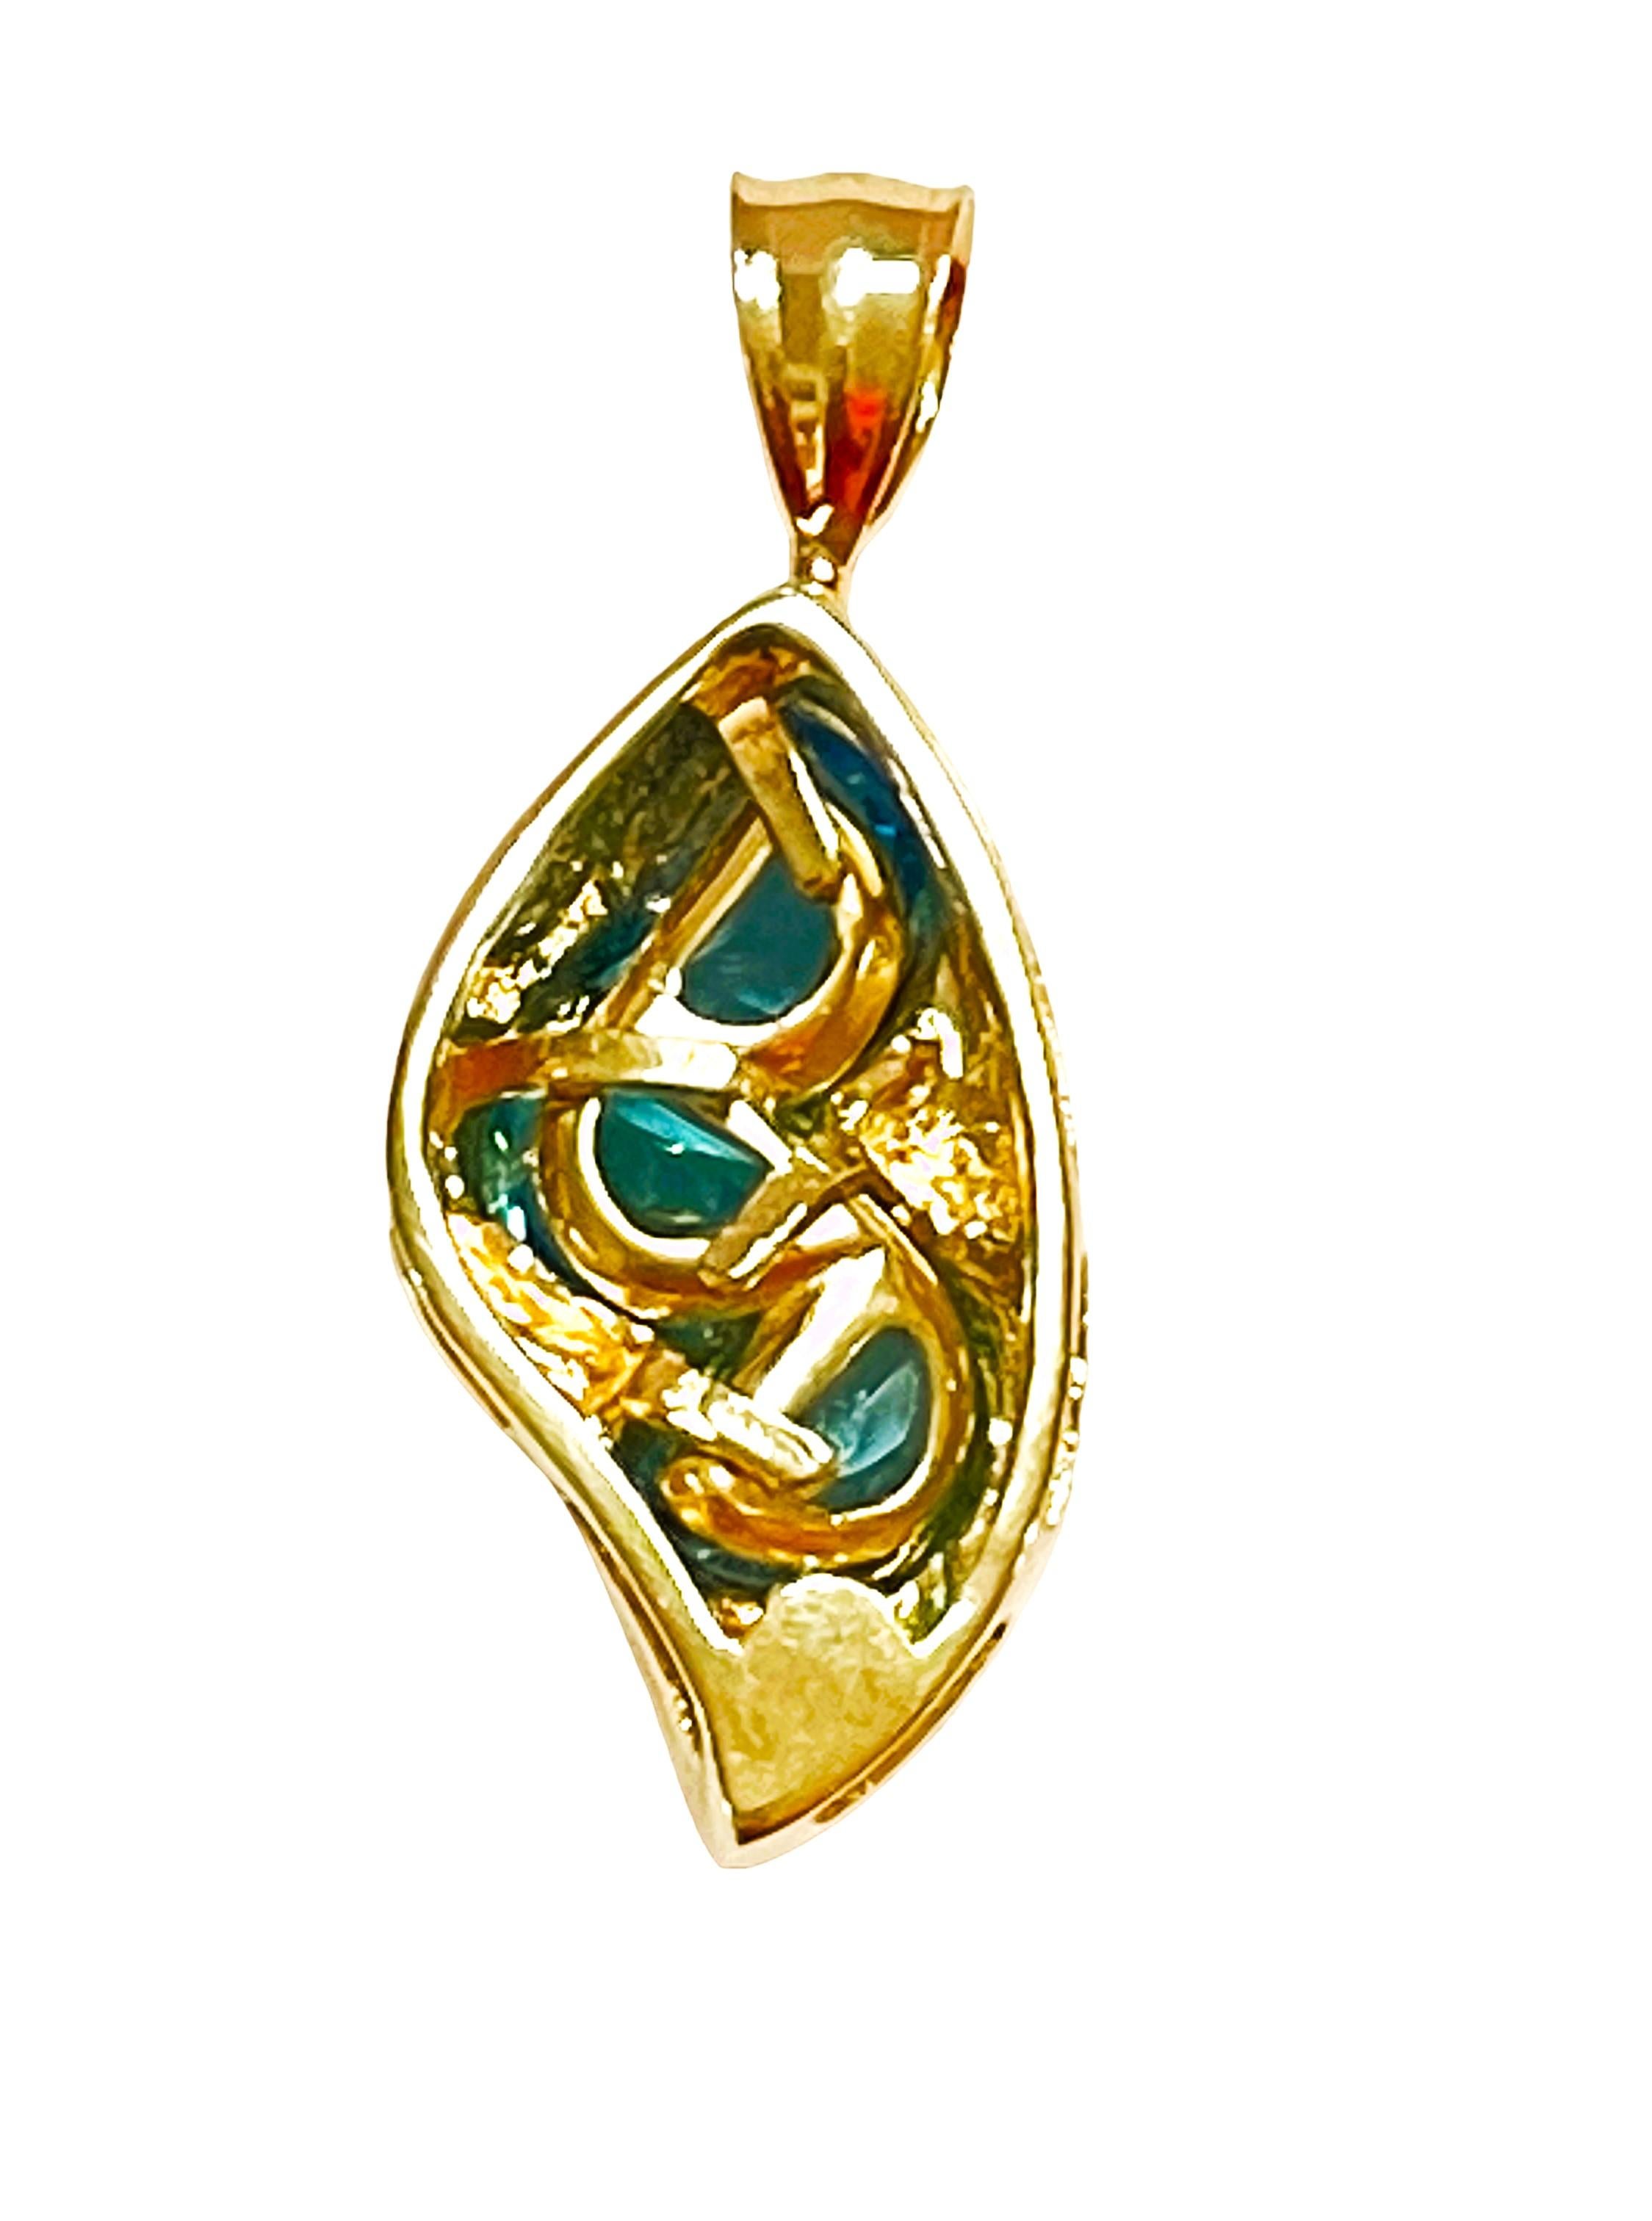 14k Yellow Gold Handmade Fancy Cut Blue Topaz Pendant with Appraisal For Sale 1